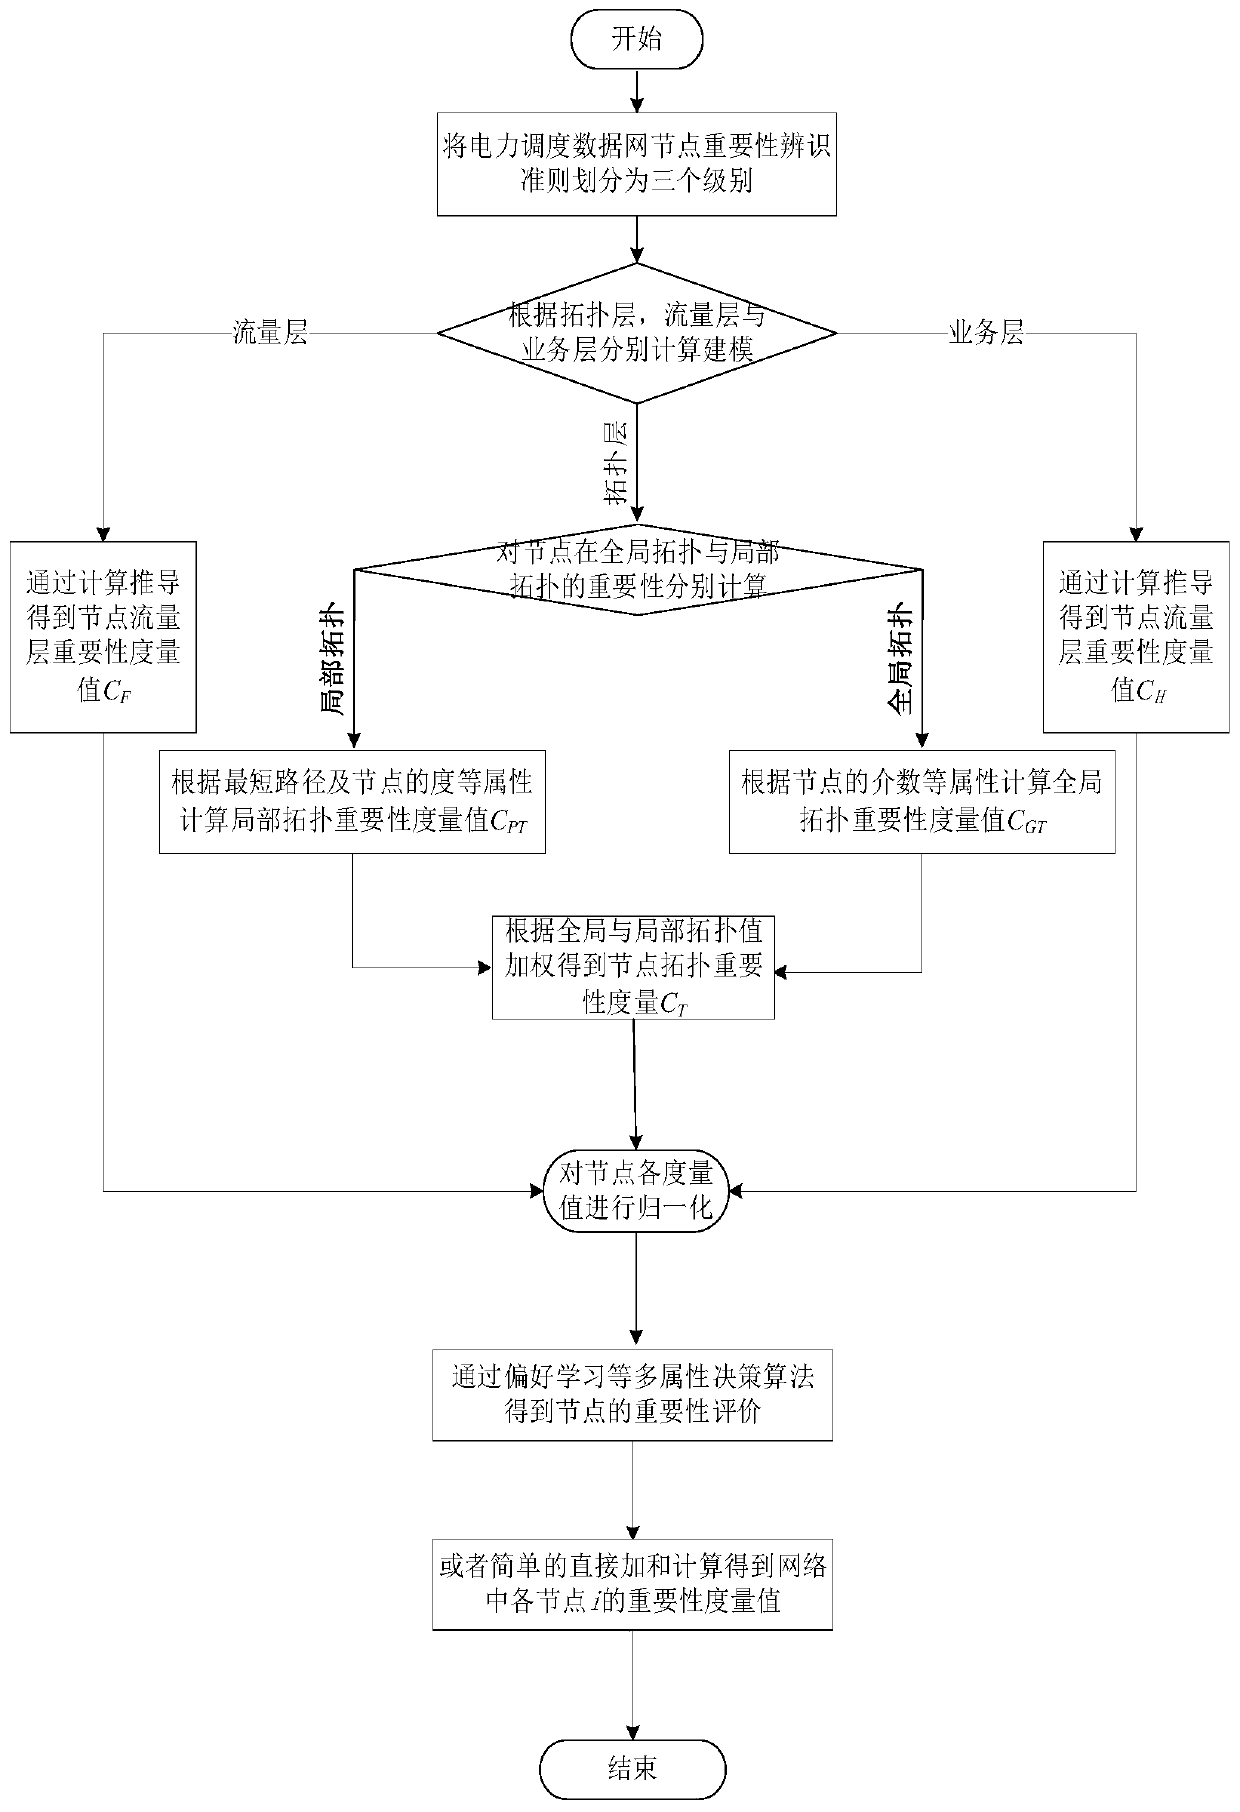 Power dispatching communication network node importance identification and evaluation method